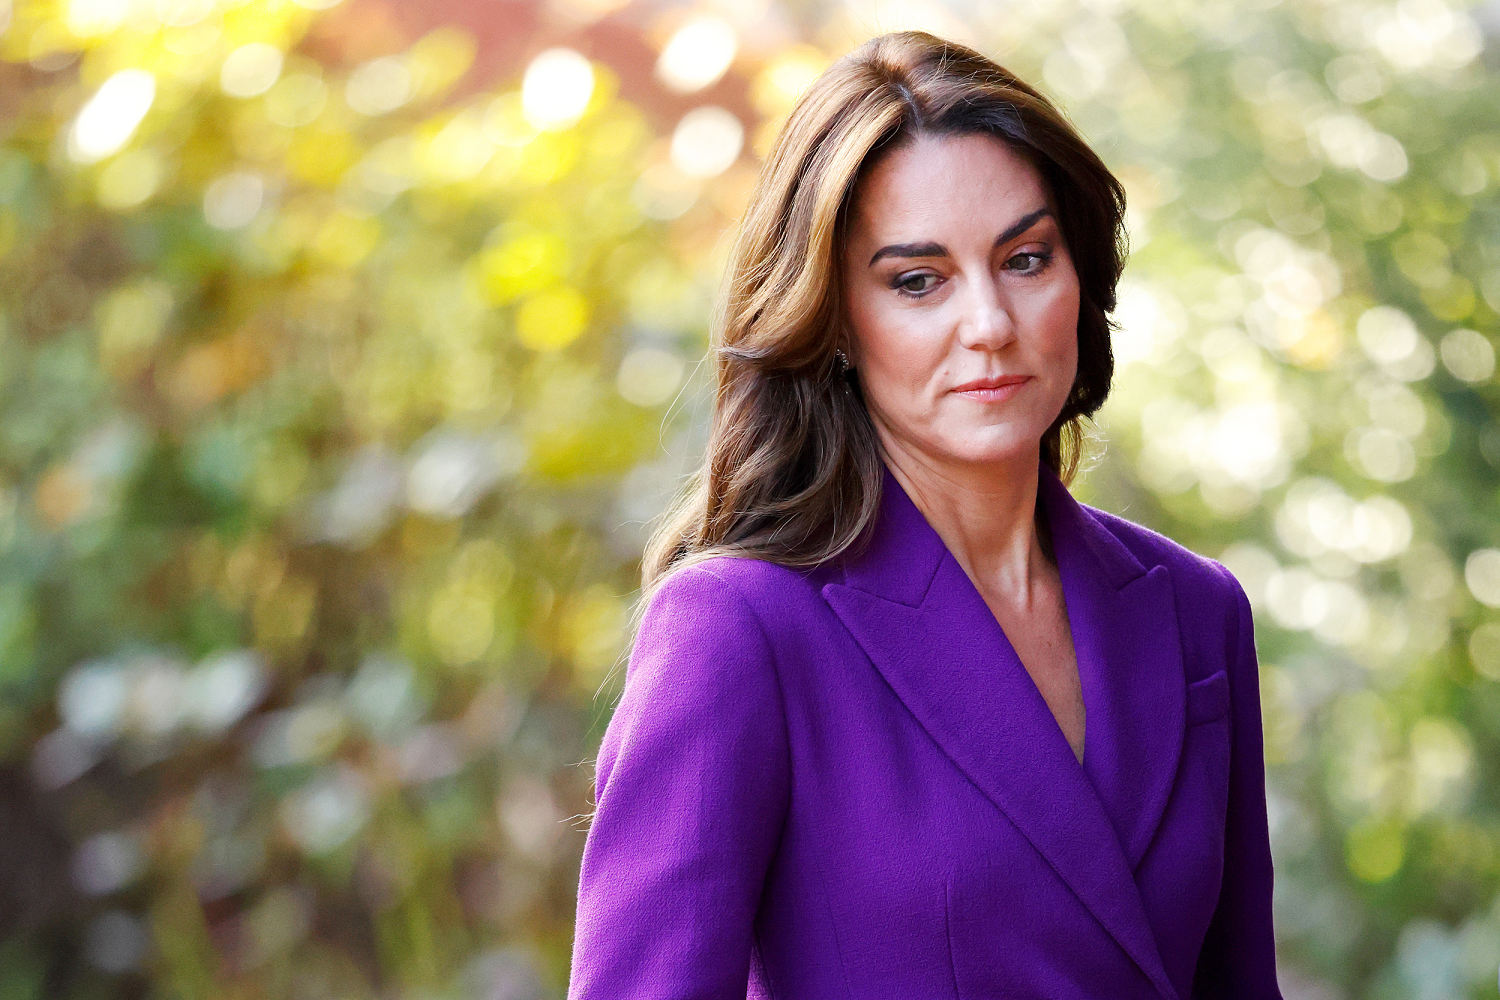 Were Princess Kate's medical notes snooped on? U.K. watchdog probes possible breach